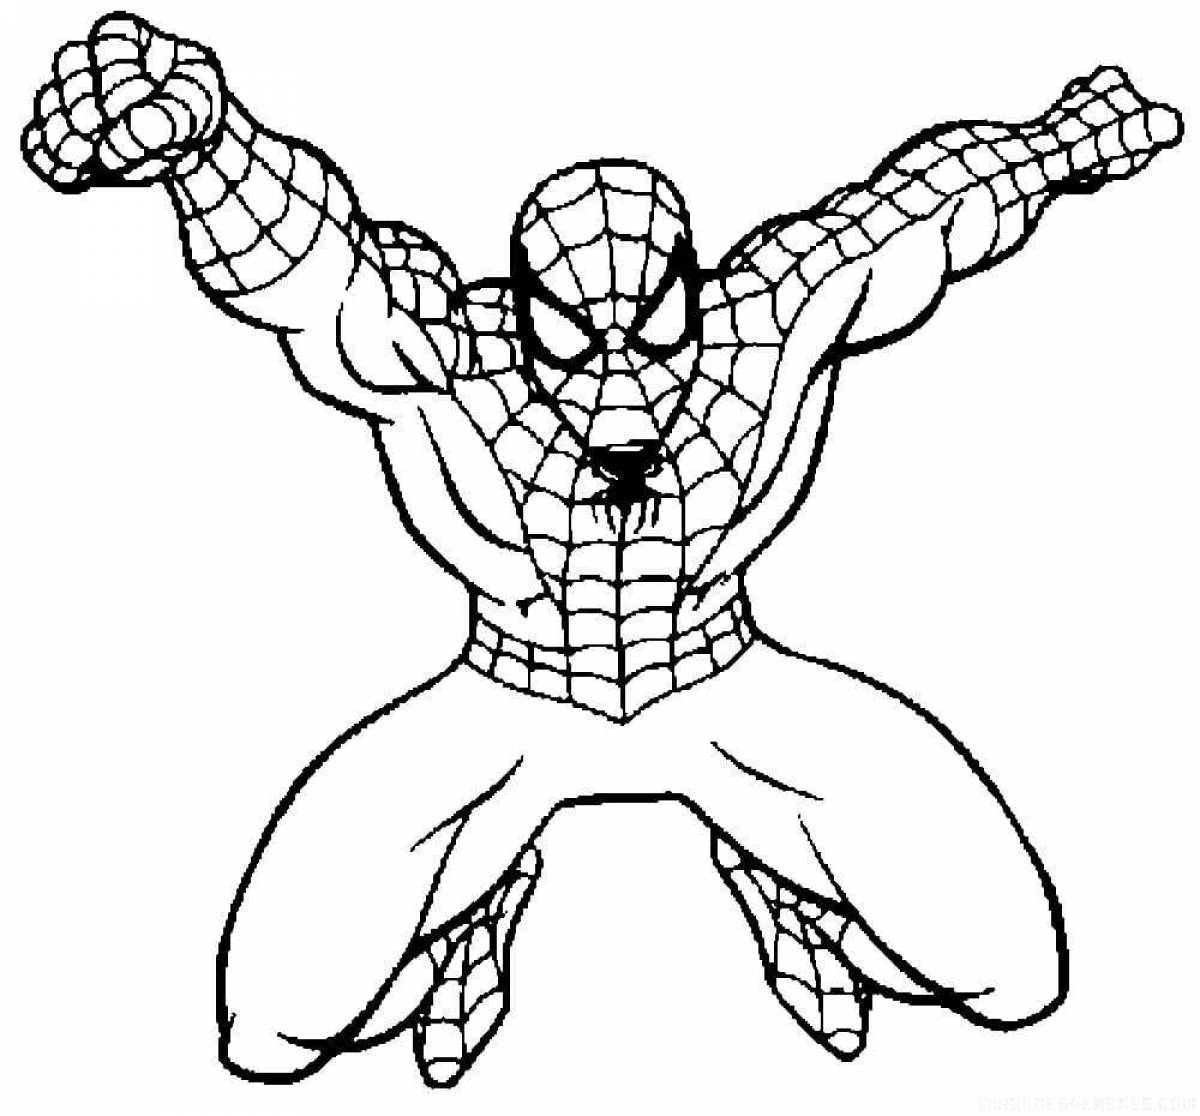 Spider-man coloring without decorations